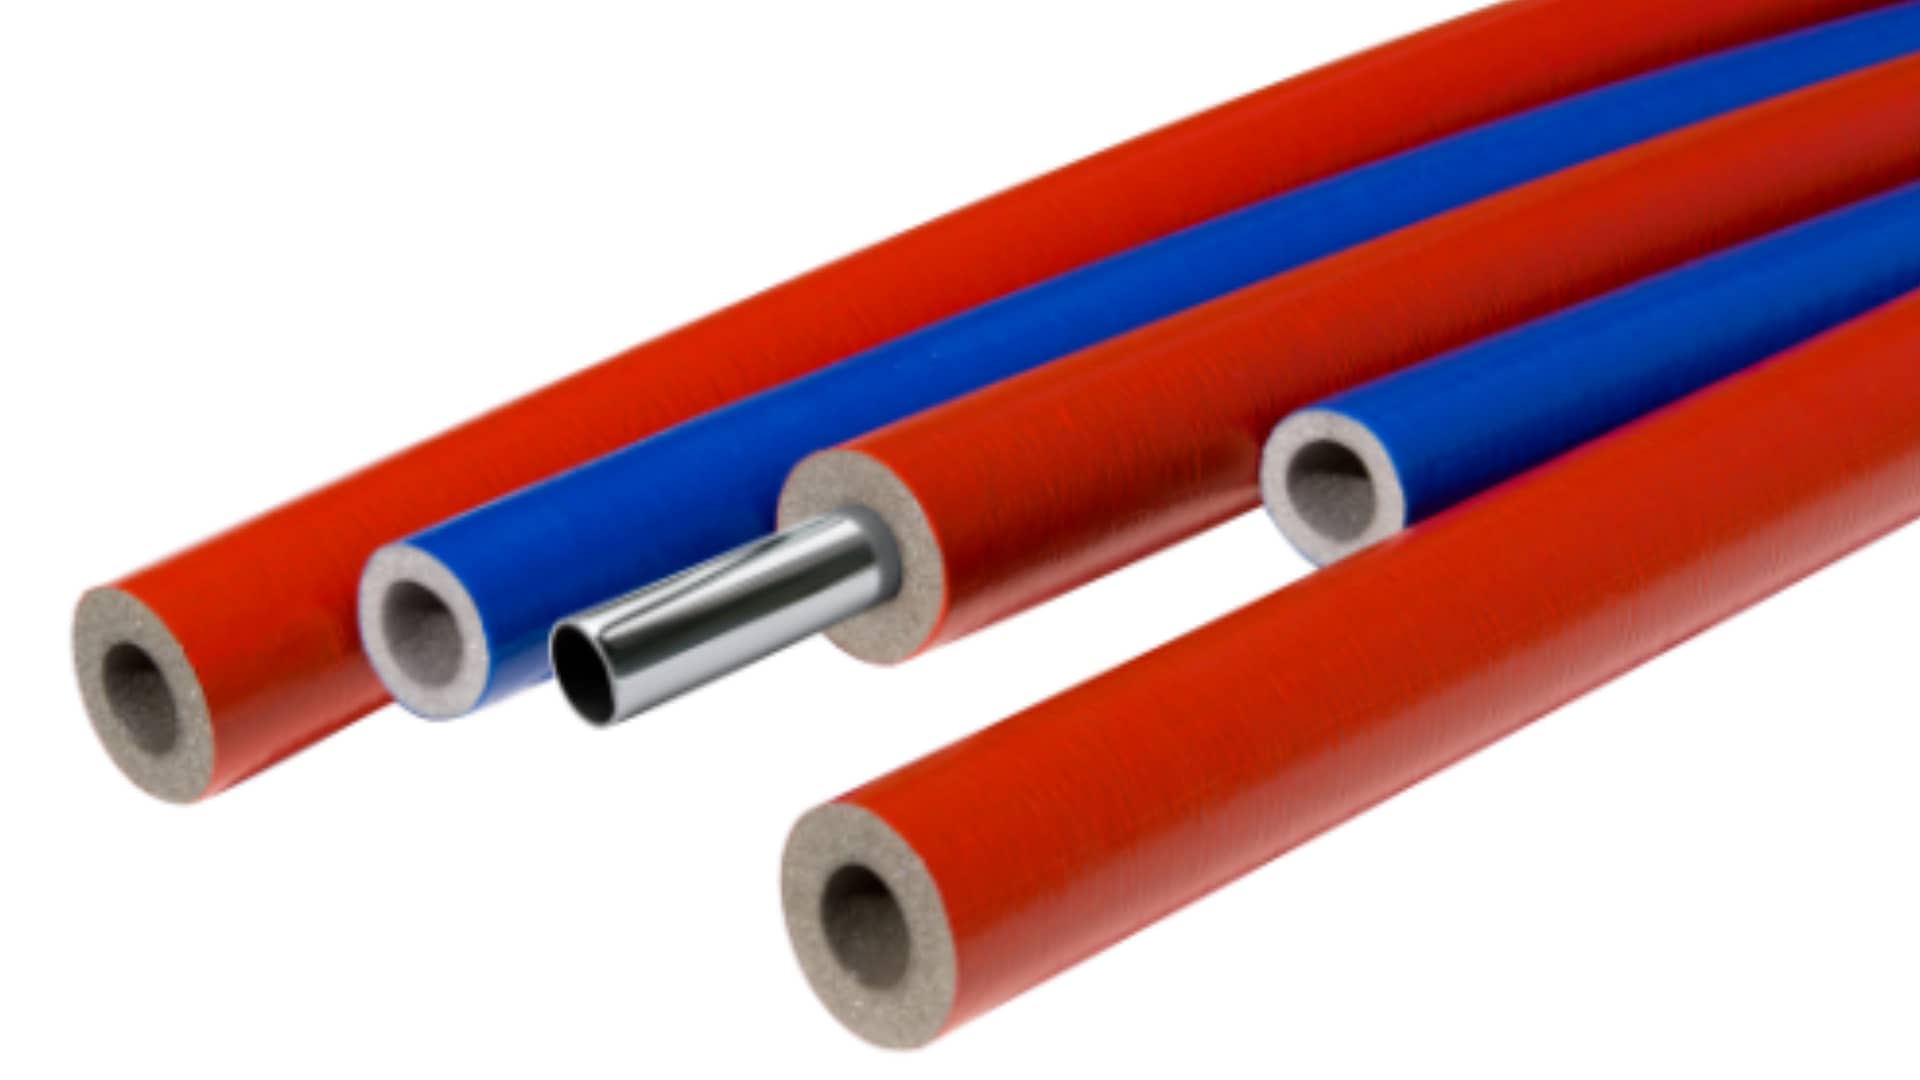 Foam pipe for Heat and sound insulation of pipes, insulation of construction joints with protective coating in different colors